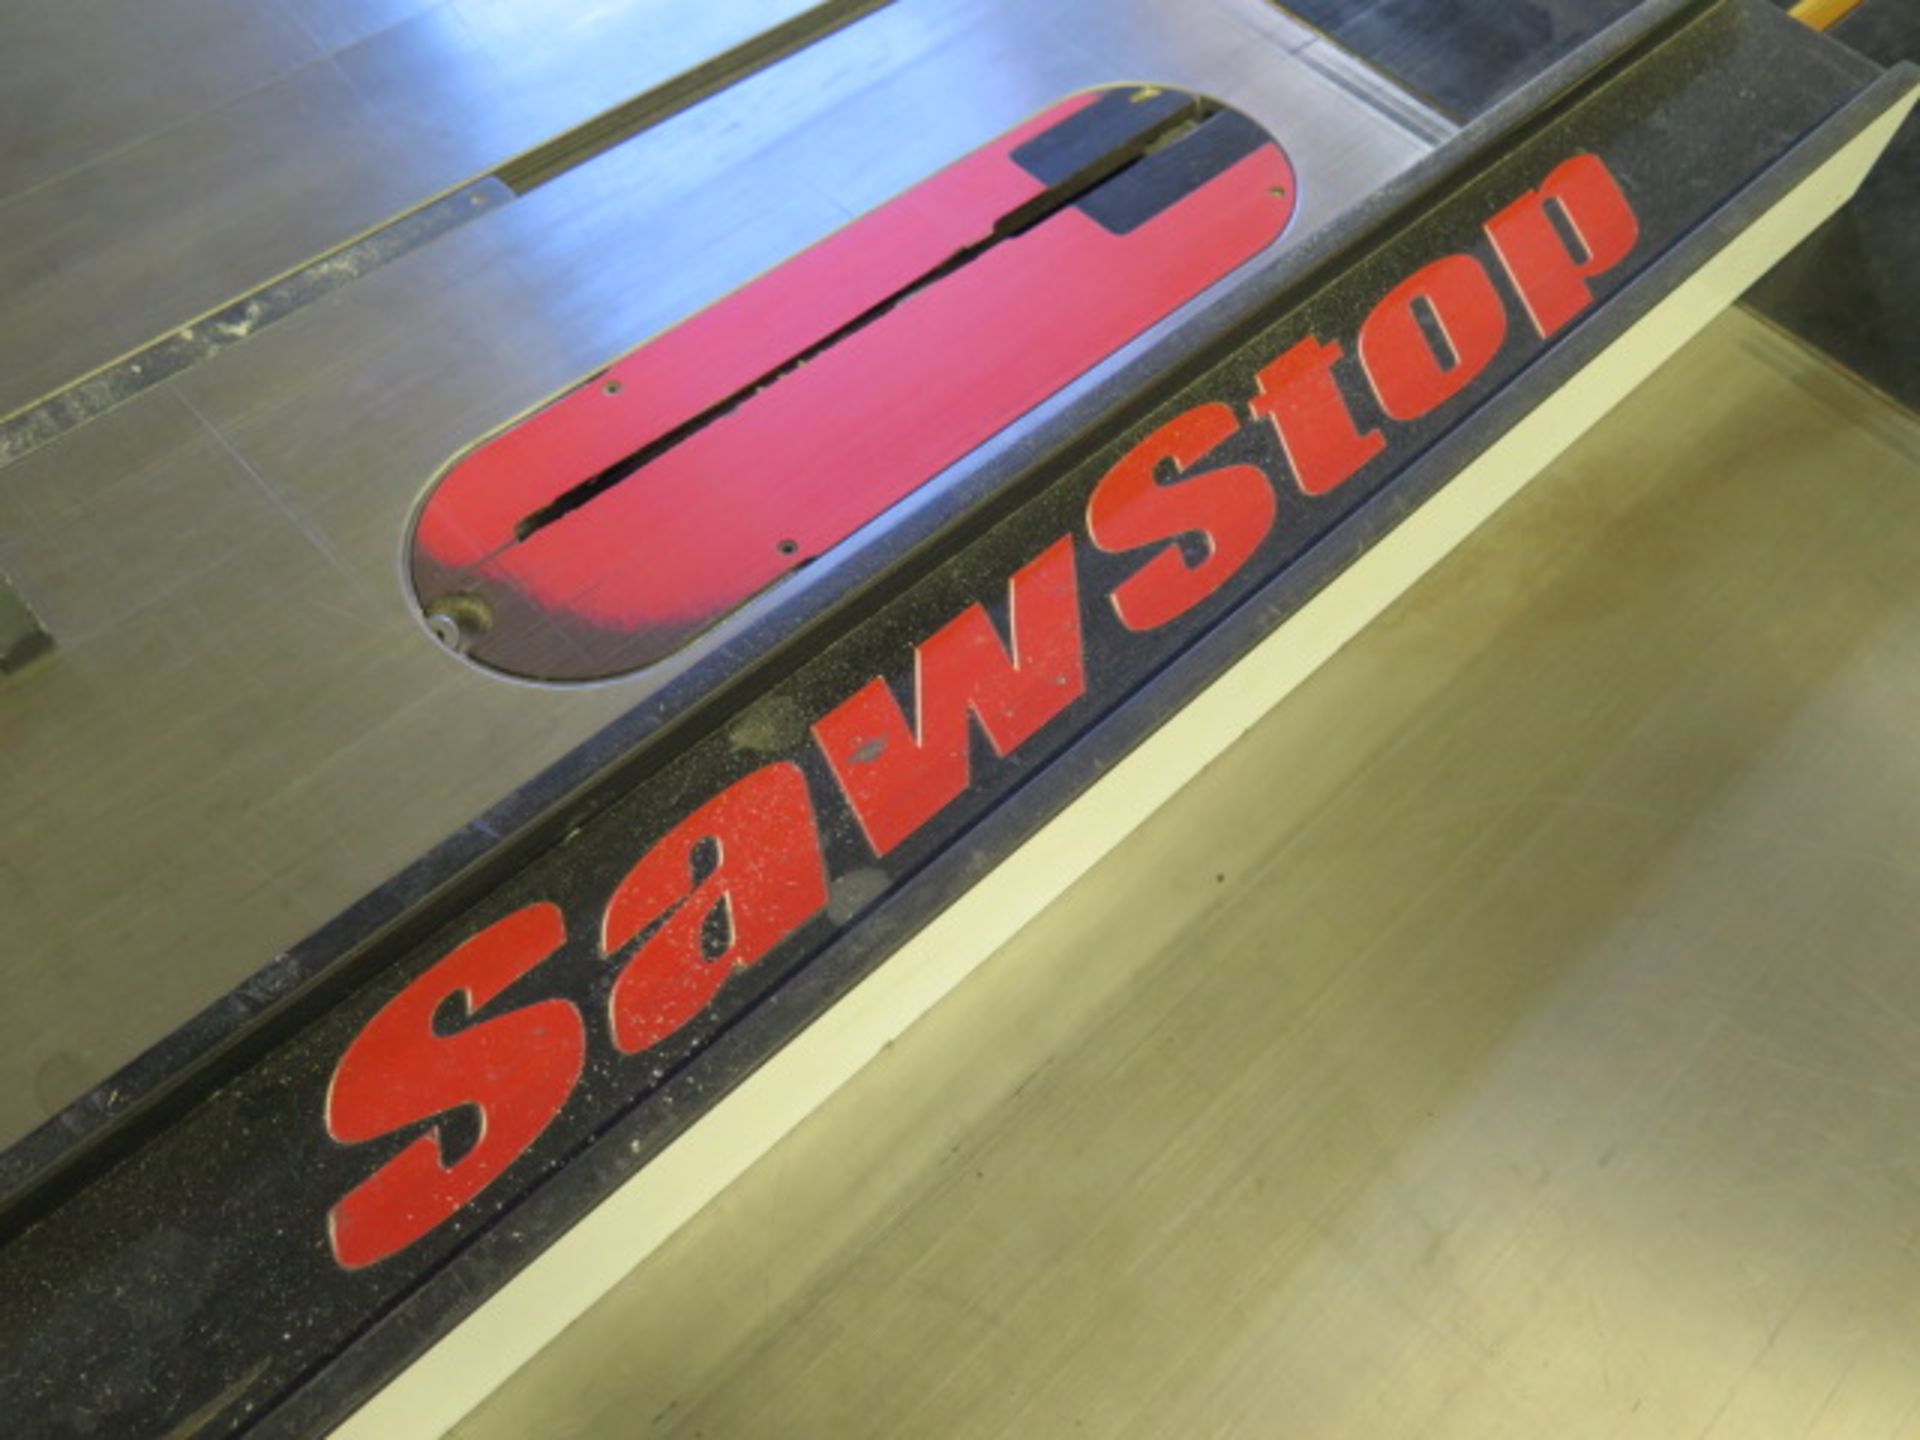 SawStop mdl. PCS 31230 10" Professional Cabinet Saw s/n P111130350 w/ Emerg Stop System, SOLD AS IS - Image 4 of 16